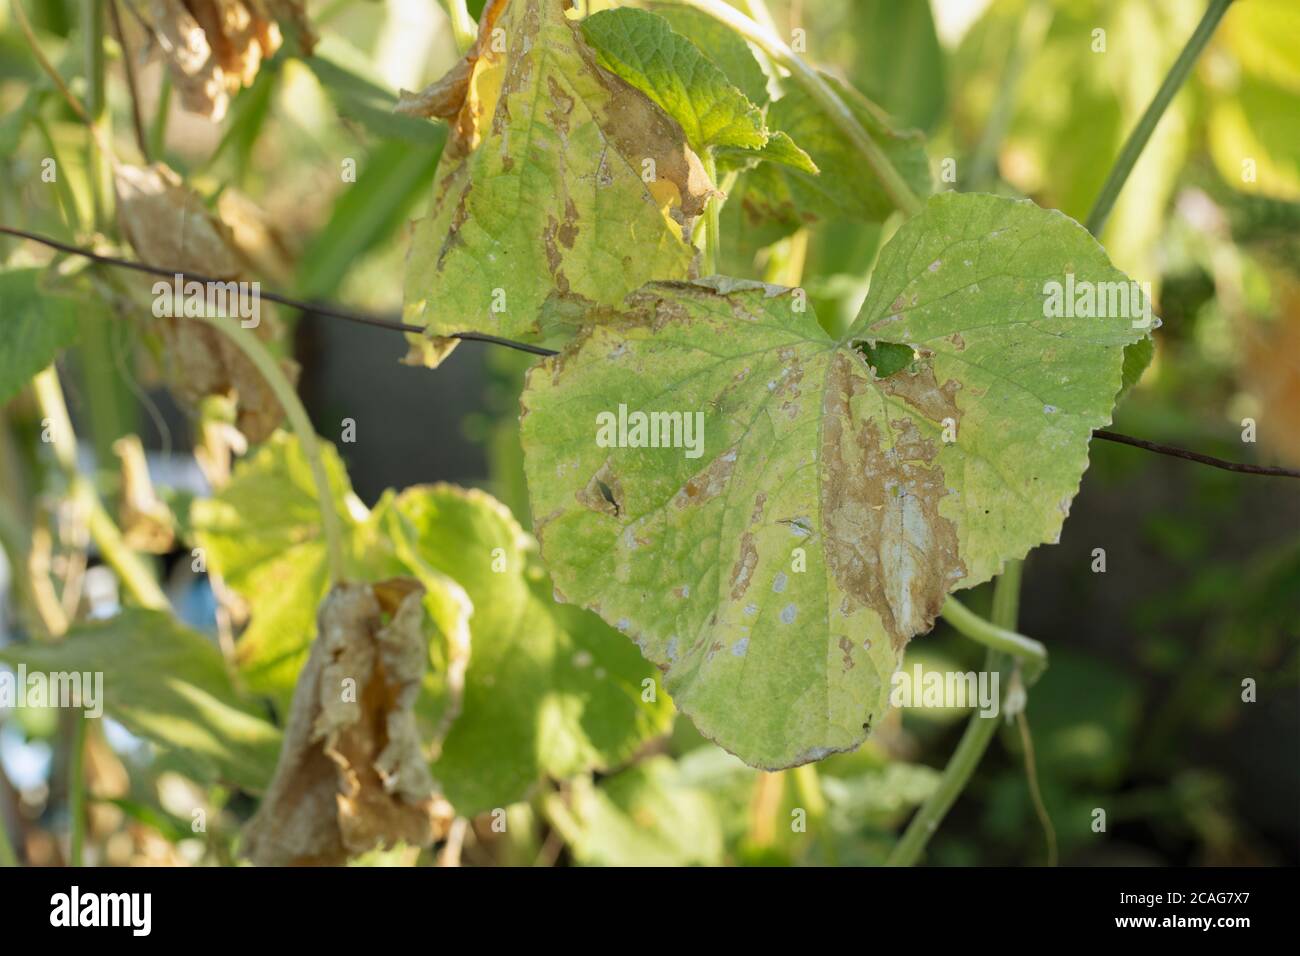 Pest damaged cucumber leave caused by harmful insects, plant fungi, thrips and other bacterium diseases. Stock Photo